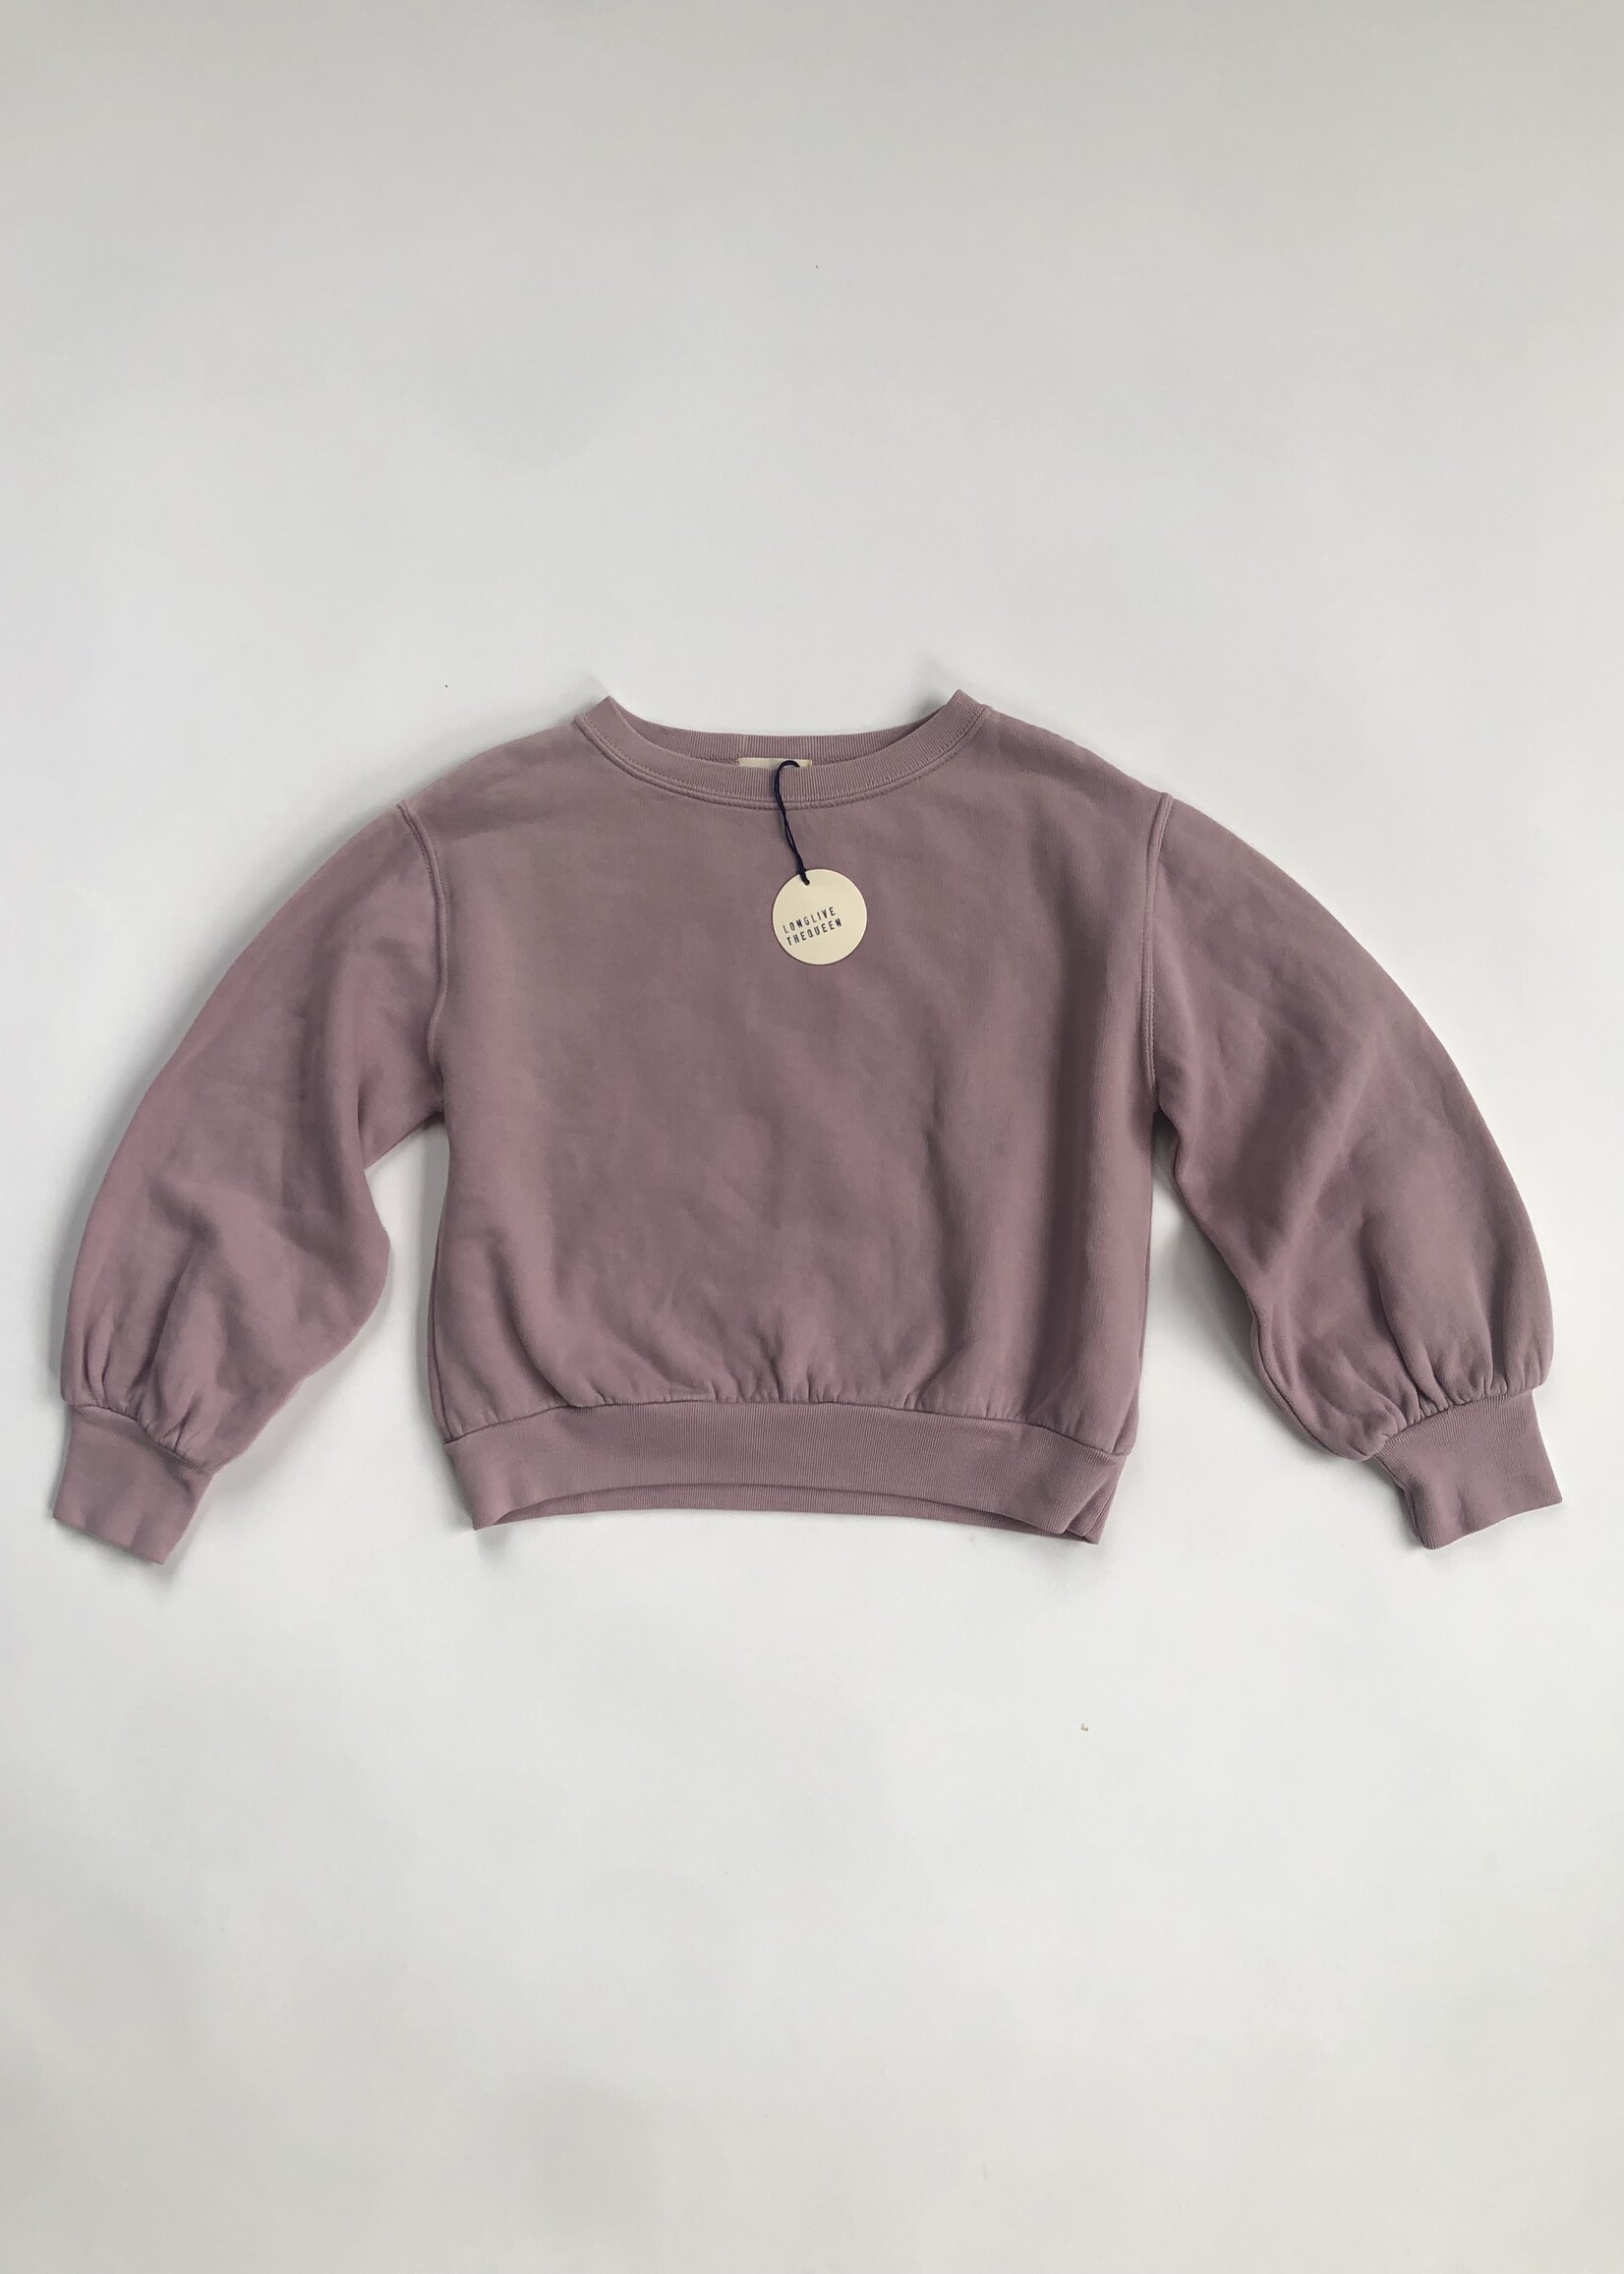 Long Live The Queen Lilac sweater 6-8Y